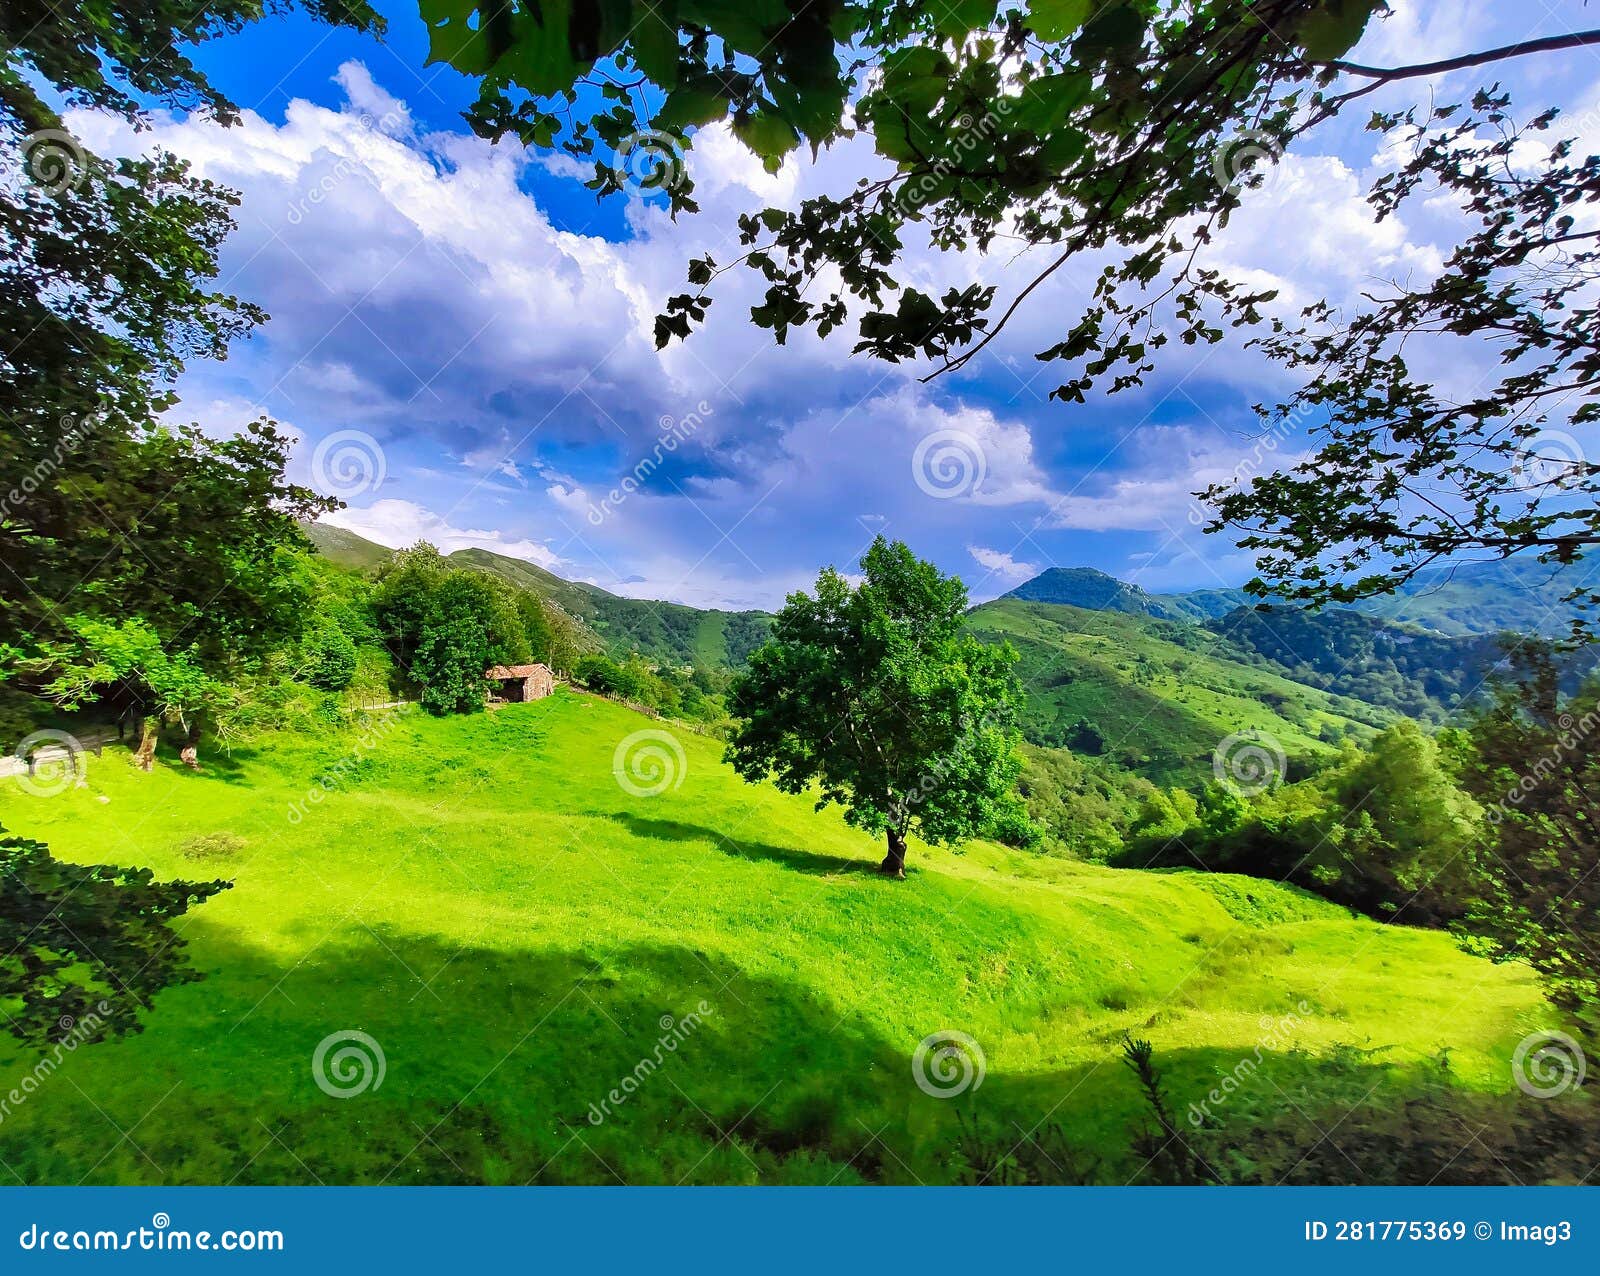 landscape with meadows near frieru track, redes natural park and biosphere reserve, caso municipality, asturias, spain